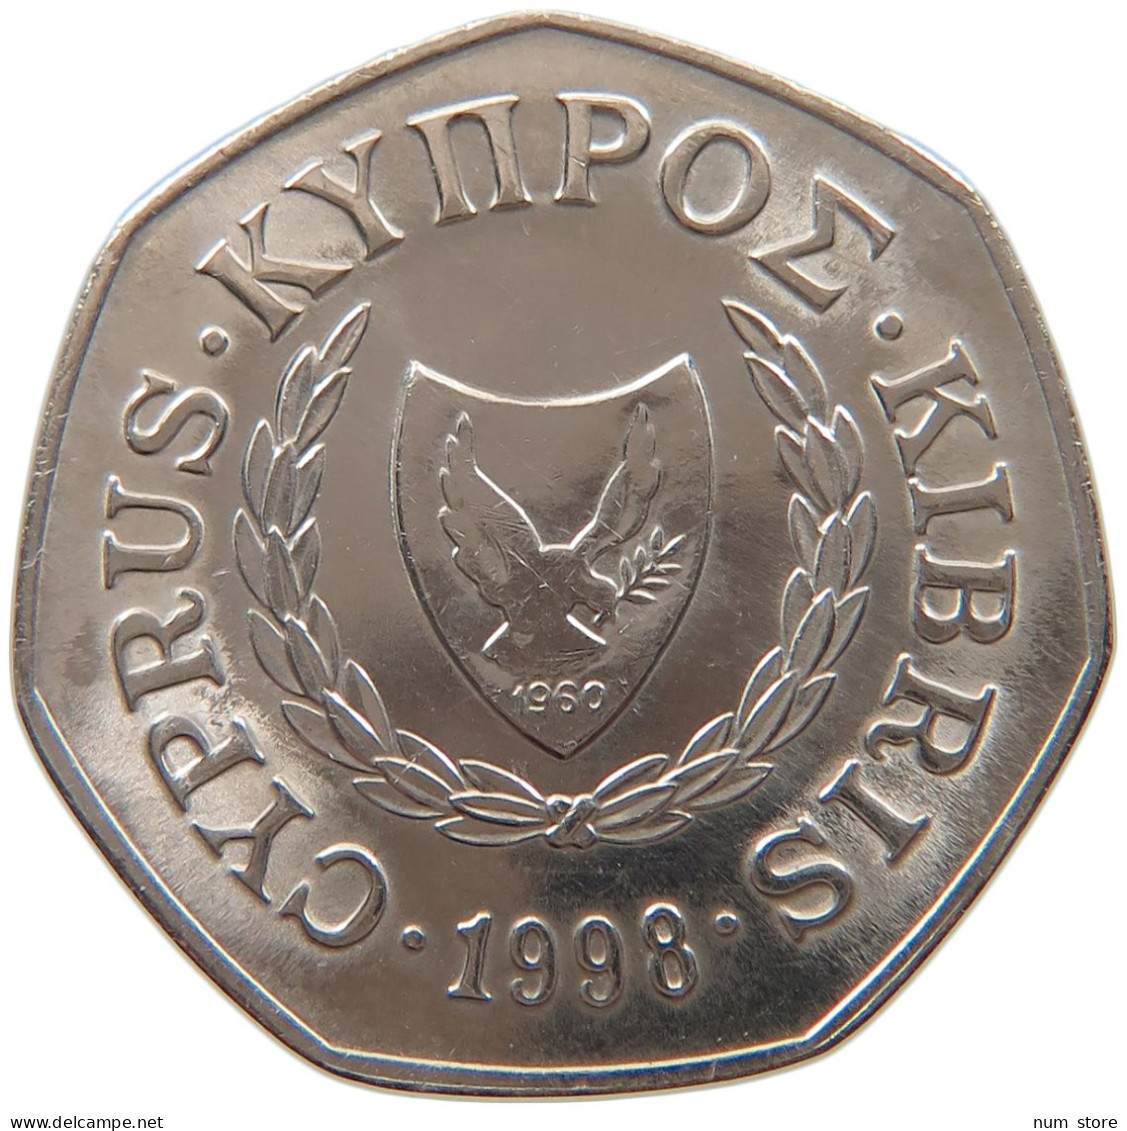 CYPRUS 50 CENTS 1998  #MA 062982 - Chypre